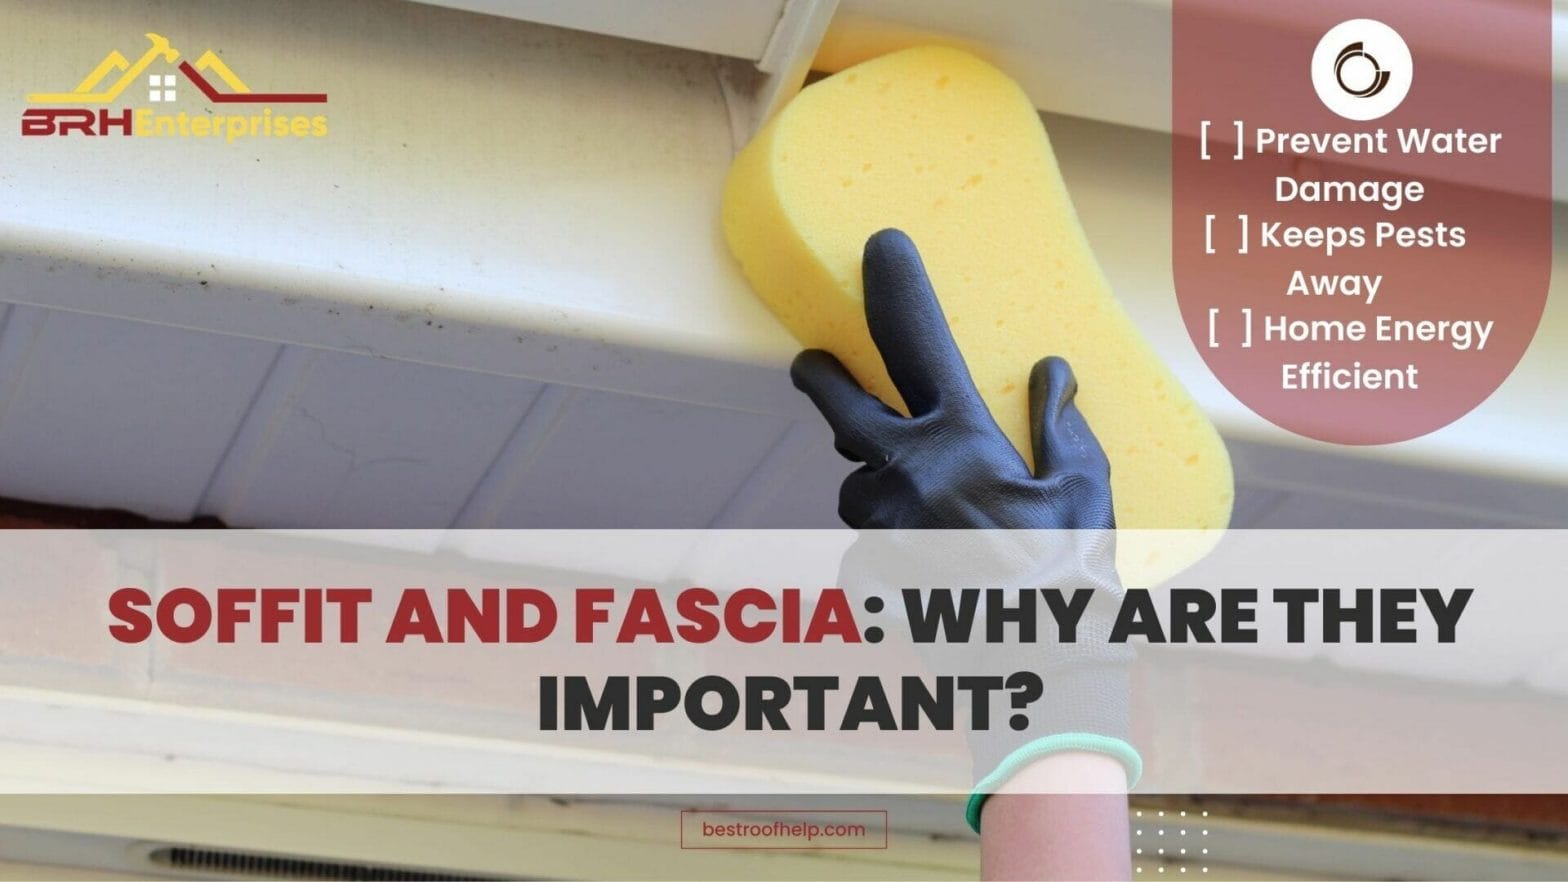 What Are Soffit And Fascia & Why Are They Important?